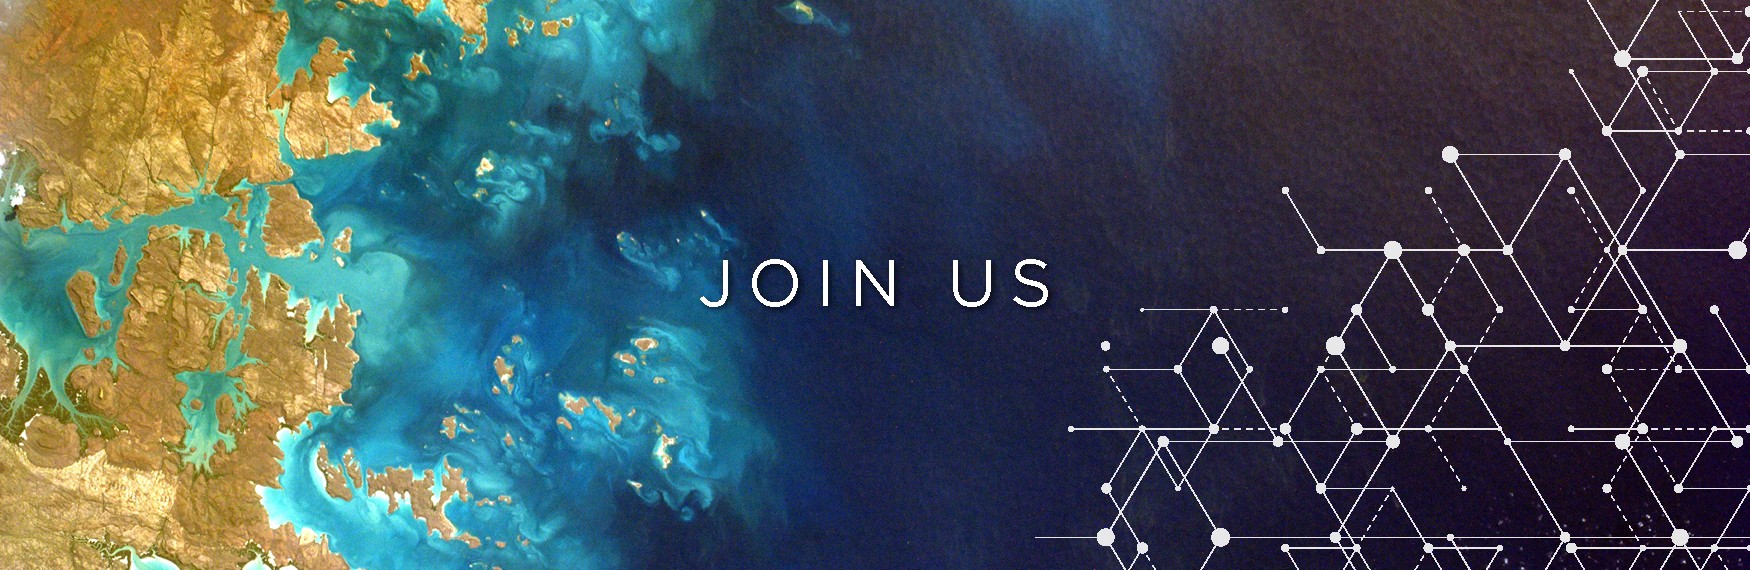 Join our mailing list banner - abstract graphic